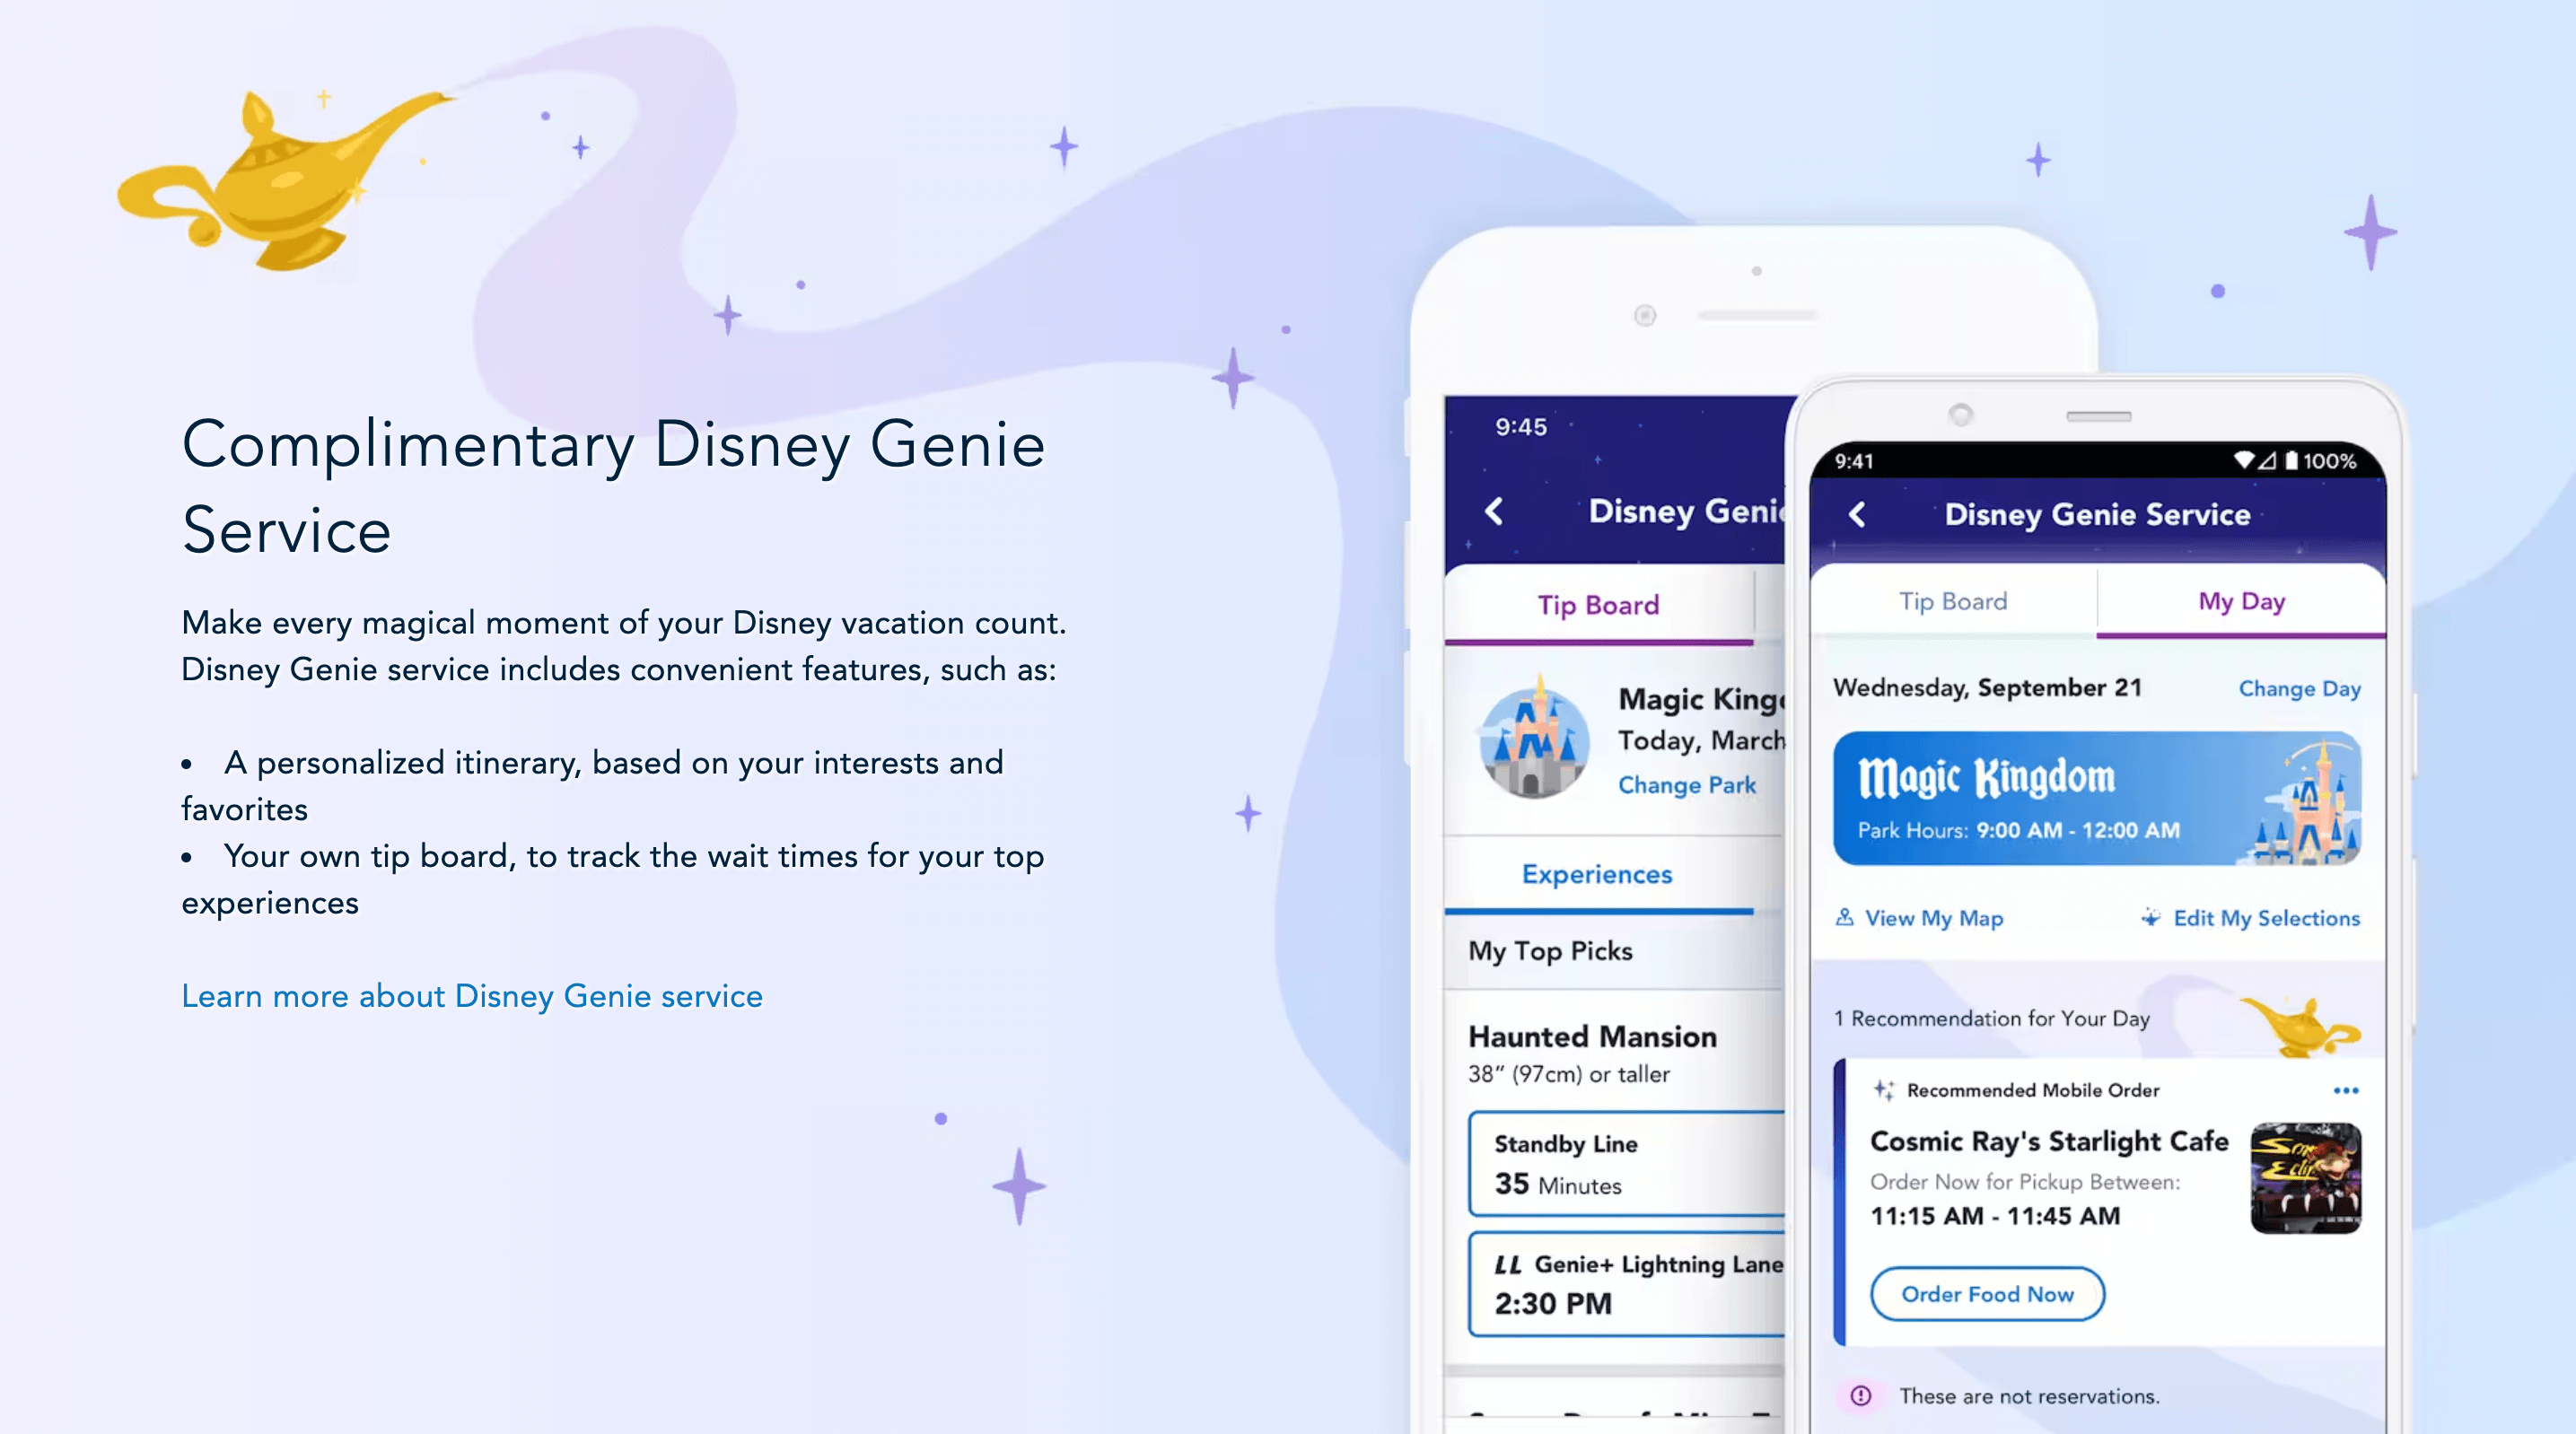 A screenshot of the Disney Genie Service explainer page on the website. The explaining text says: Complimentary Disney Genie Service. Make every magical moment of your Disney vacation count. Disney Genie service includes convenient features, such as: A personalized itinerary, based on your interests and favorites, and your own tip board, to track the wait times for your top experiences. Learn more about Disney Genie service. There is an overlap of two smartphones showing the Disney Genie Service page in the app. One displays a tab called Tip Board which shows specific information about individual rides like height requirements, wait time, and availability for Lightning Lane passes. The second image shows the My Day tab which offers recommendations for food and other attractions at specified times. 